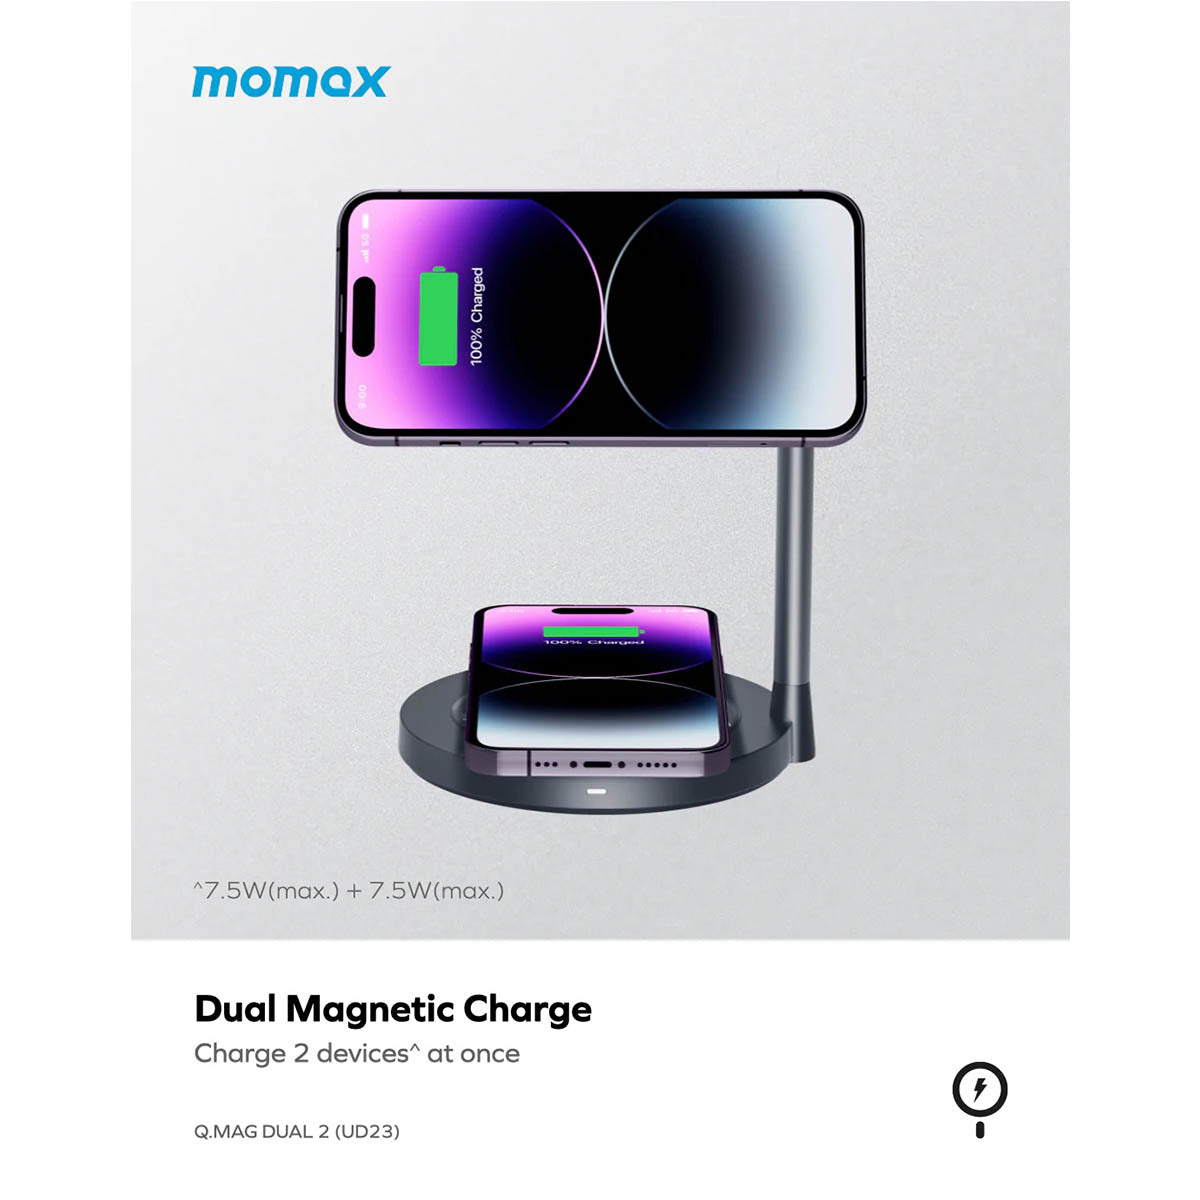 Momax Q.Mag Dual2 15W Dual Magnetic Wireless Charger (UD23)